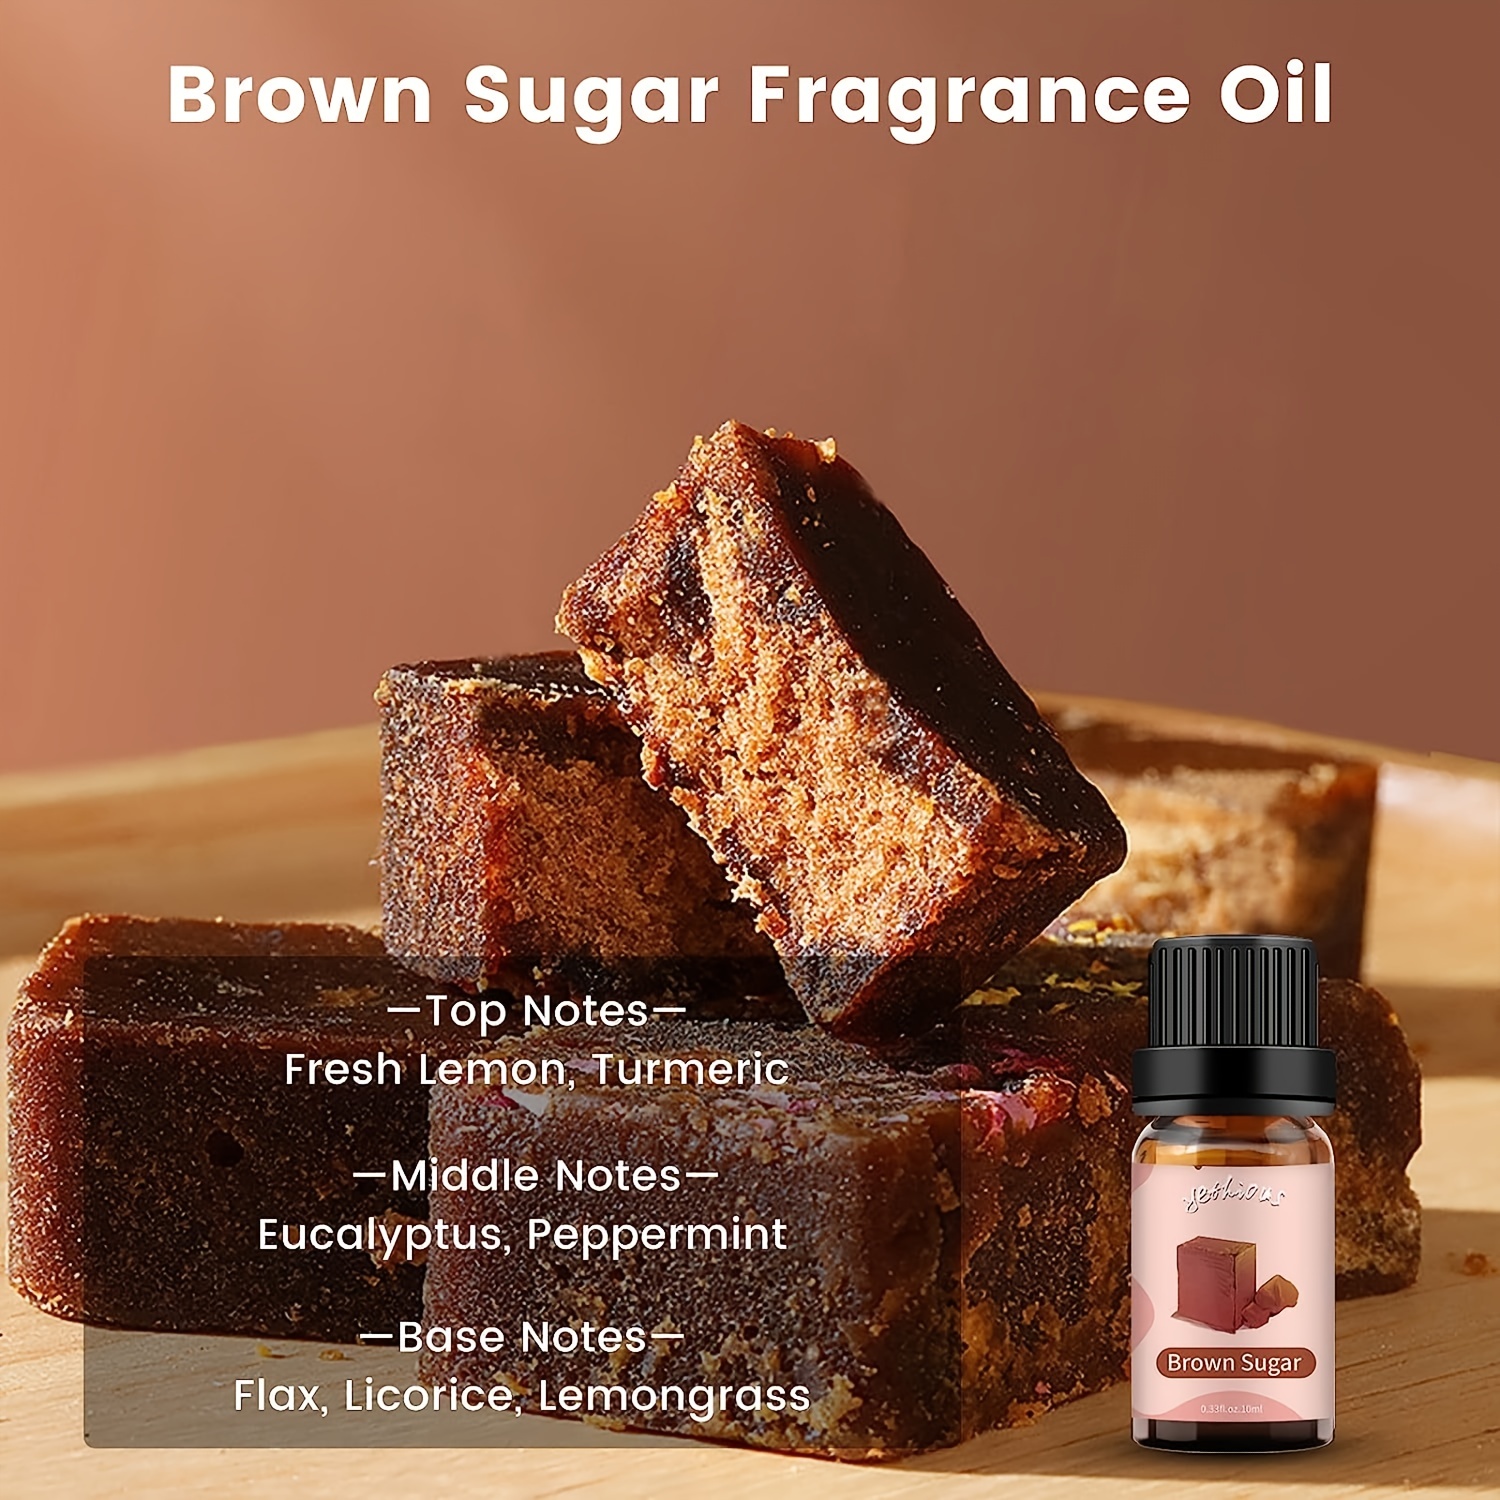 Sugar Cookie Fragrance Oil for Cold Air Diffusers